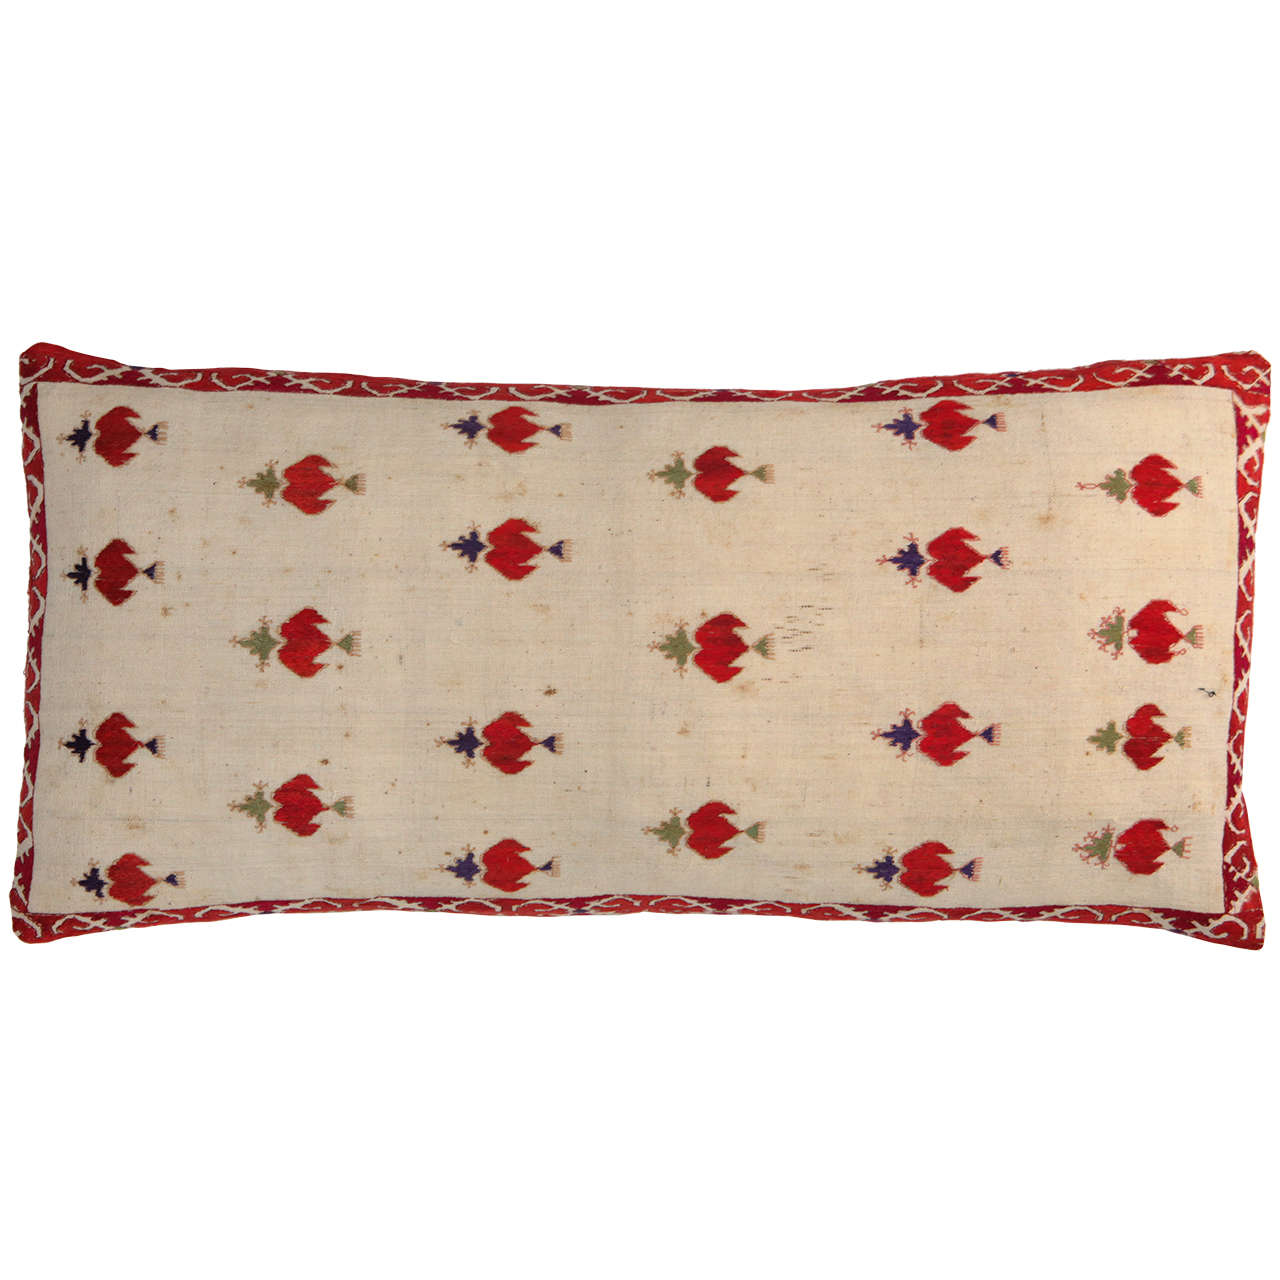 Vintage Swat Valley Embroidery Pillow